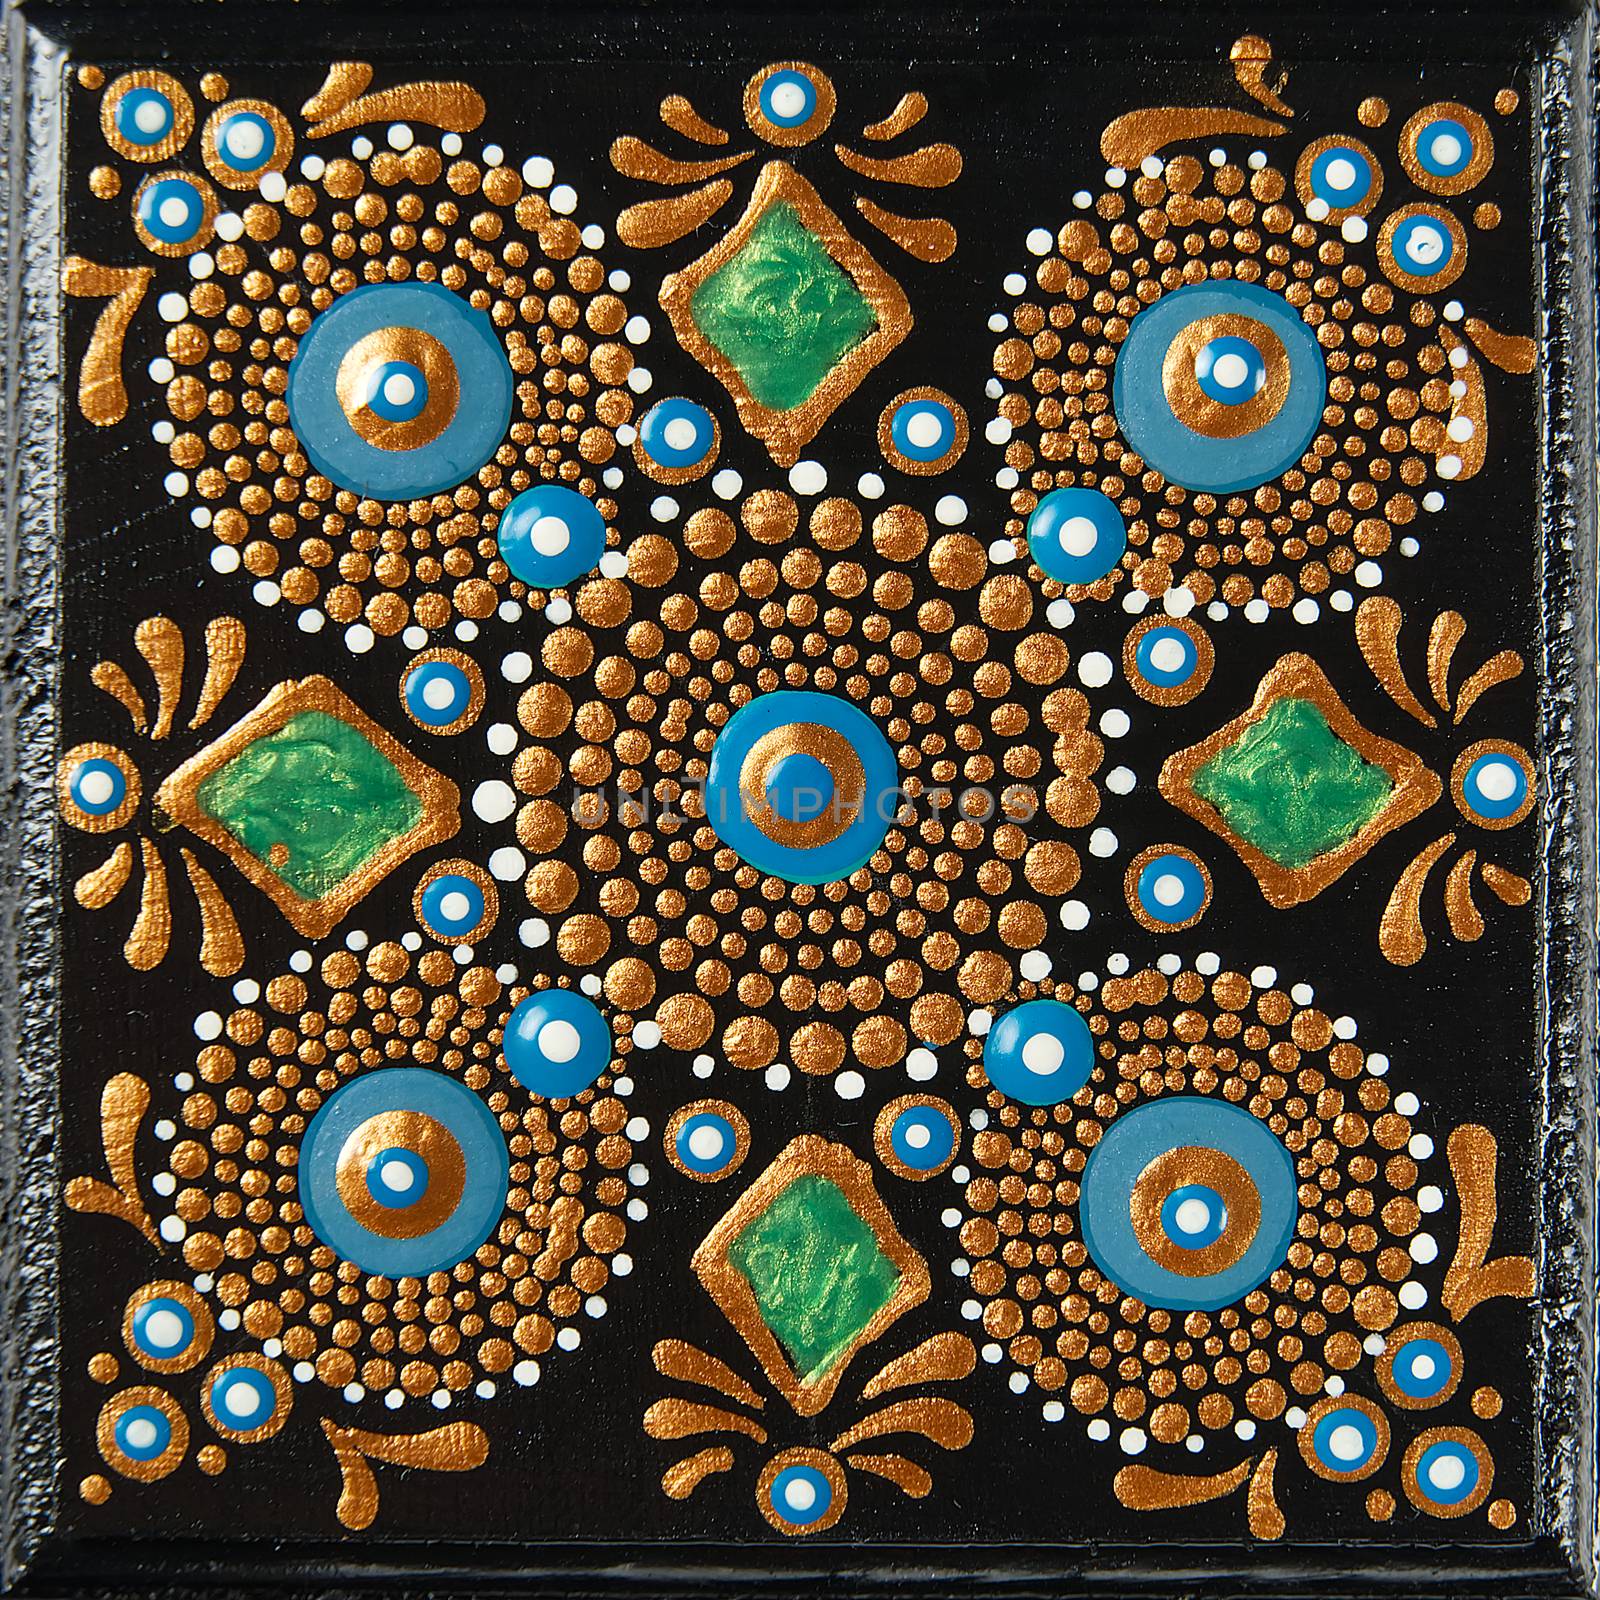 Mandala dot art painting on wood tiles. Beautiful mandala hand painted by colorful dots on black wood. National patterns with acrylic paints, handwork, dot painting. Abstract dotted background